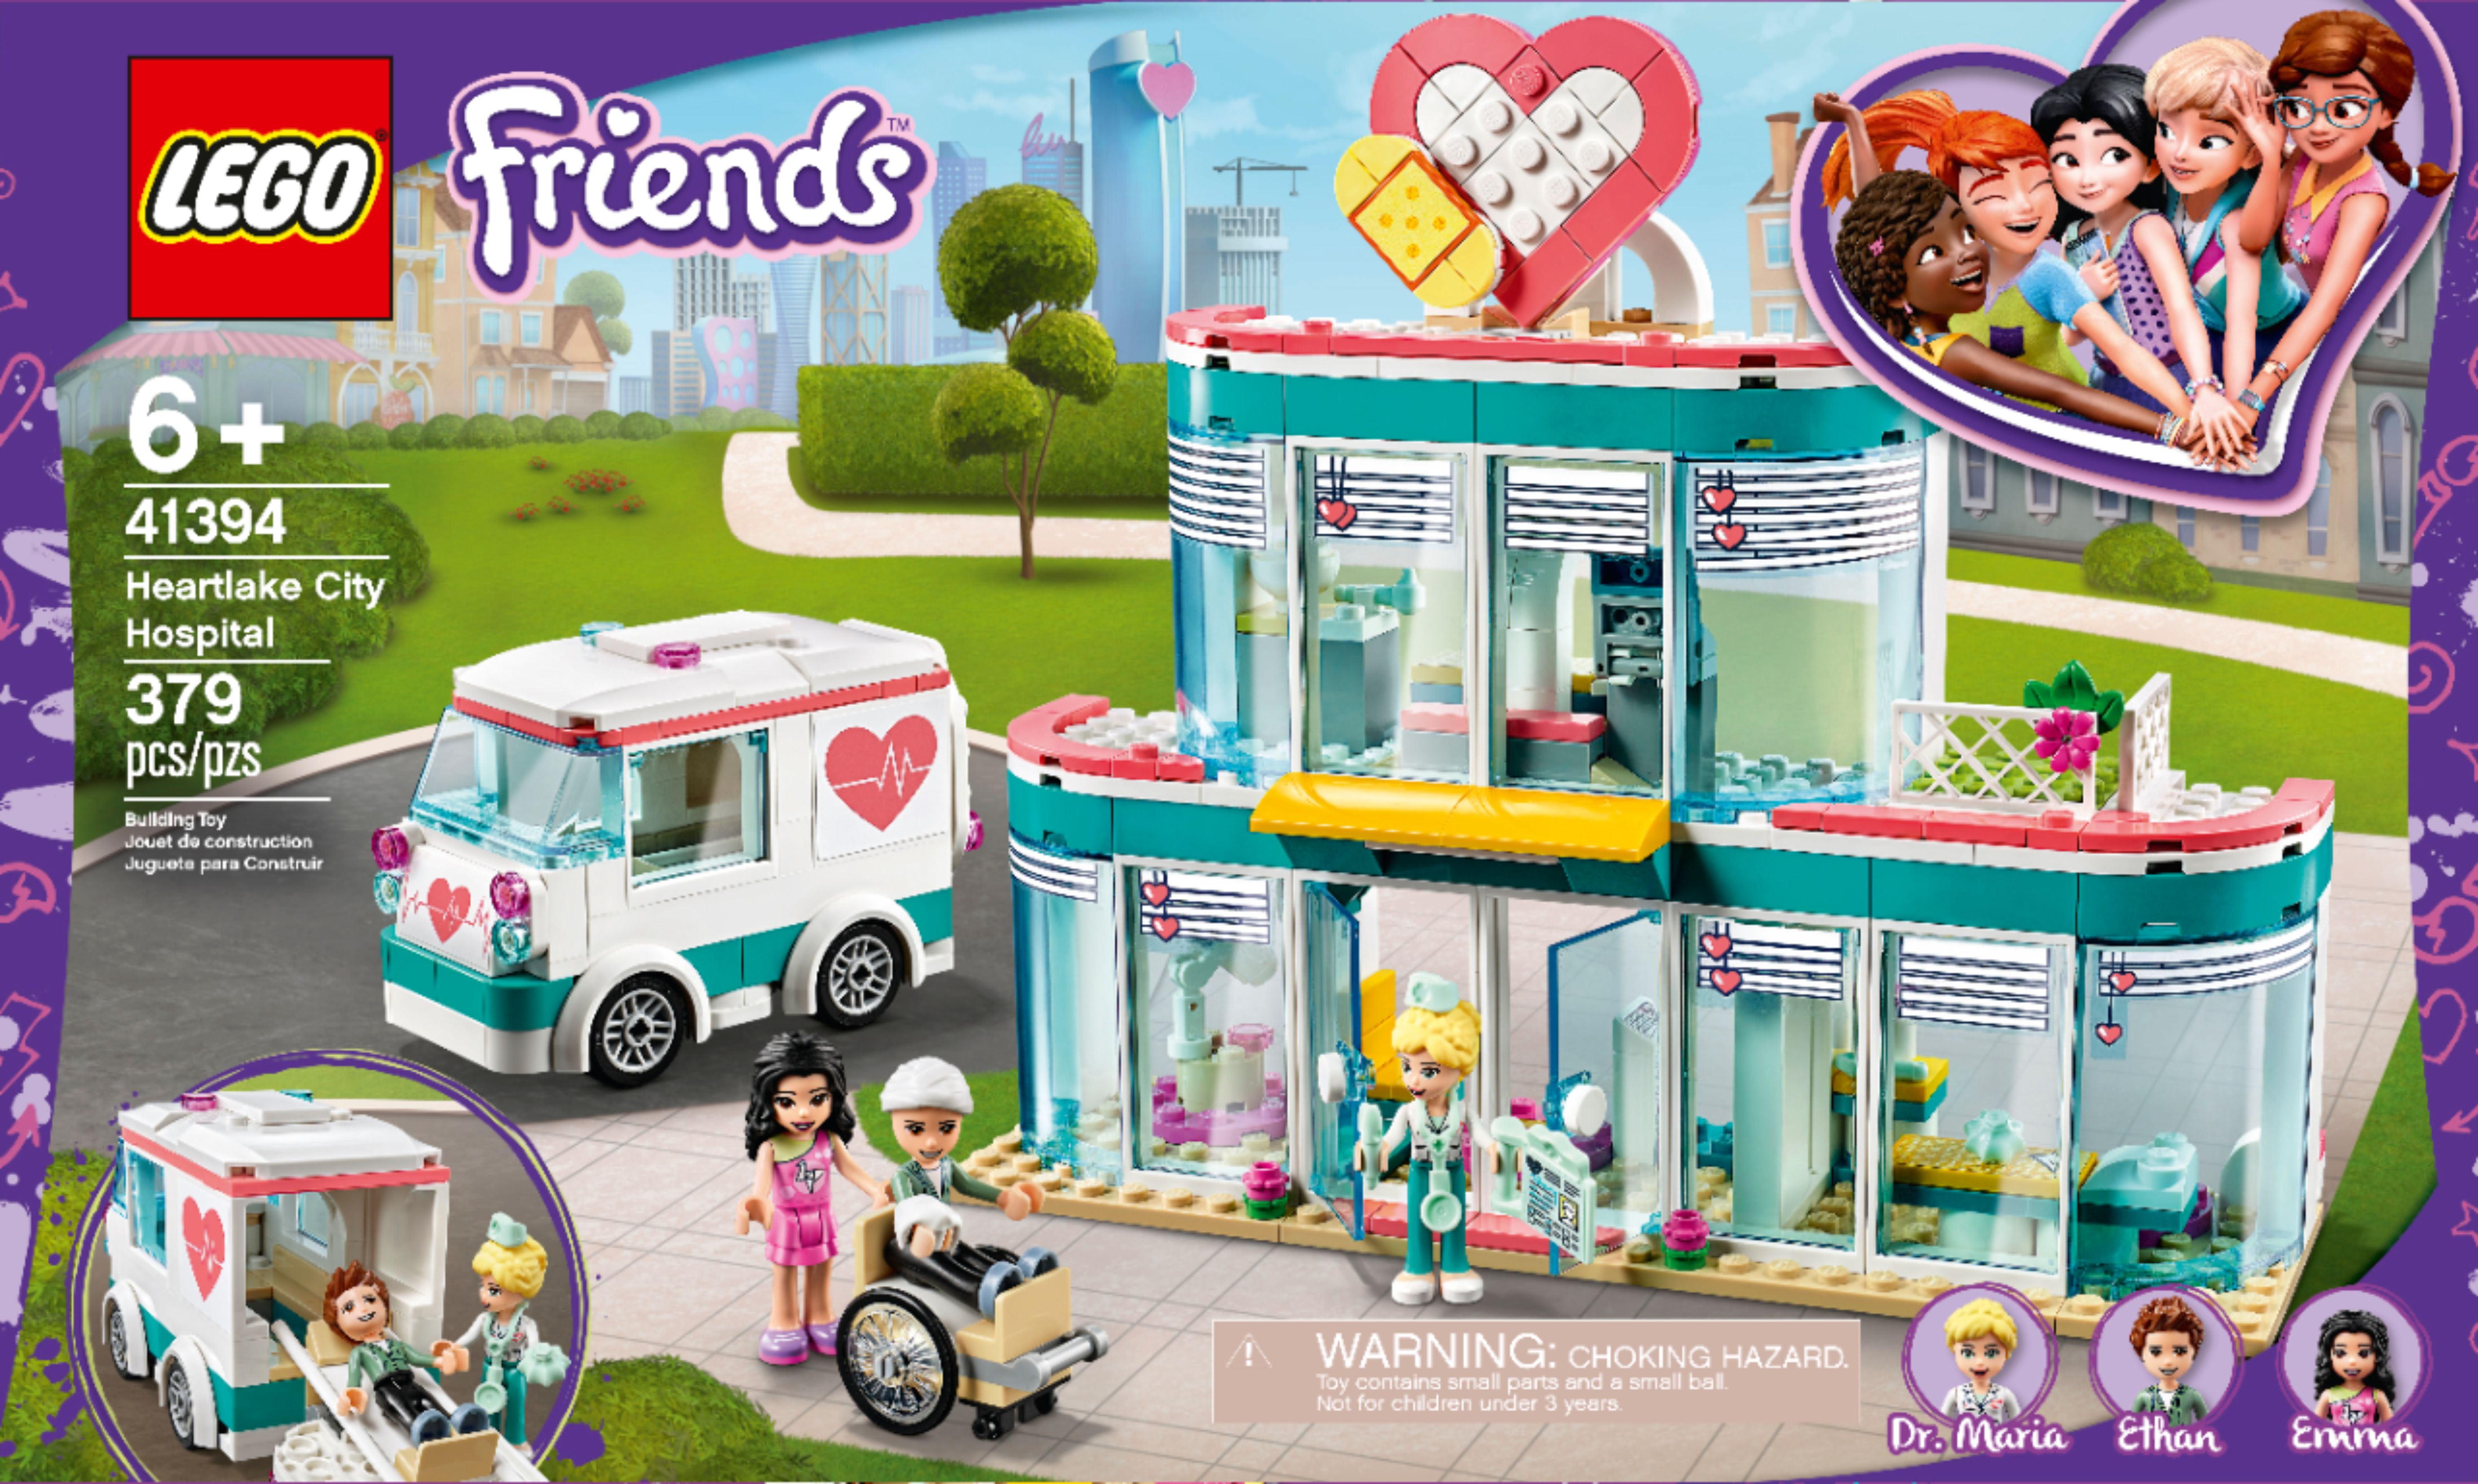 LEGO Friends Heartlake City Hospital 41394 Best Doctor Toy Building Kit Featuring LEGO Friends Character Emma New 2020 379 Pieces